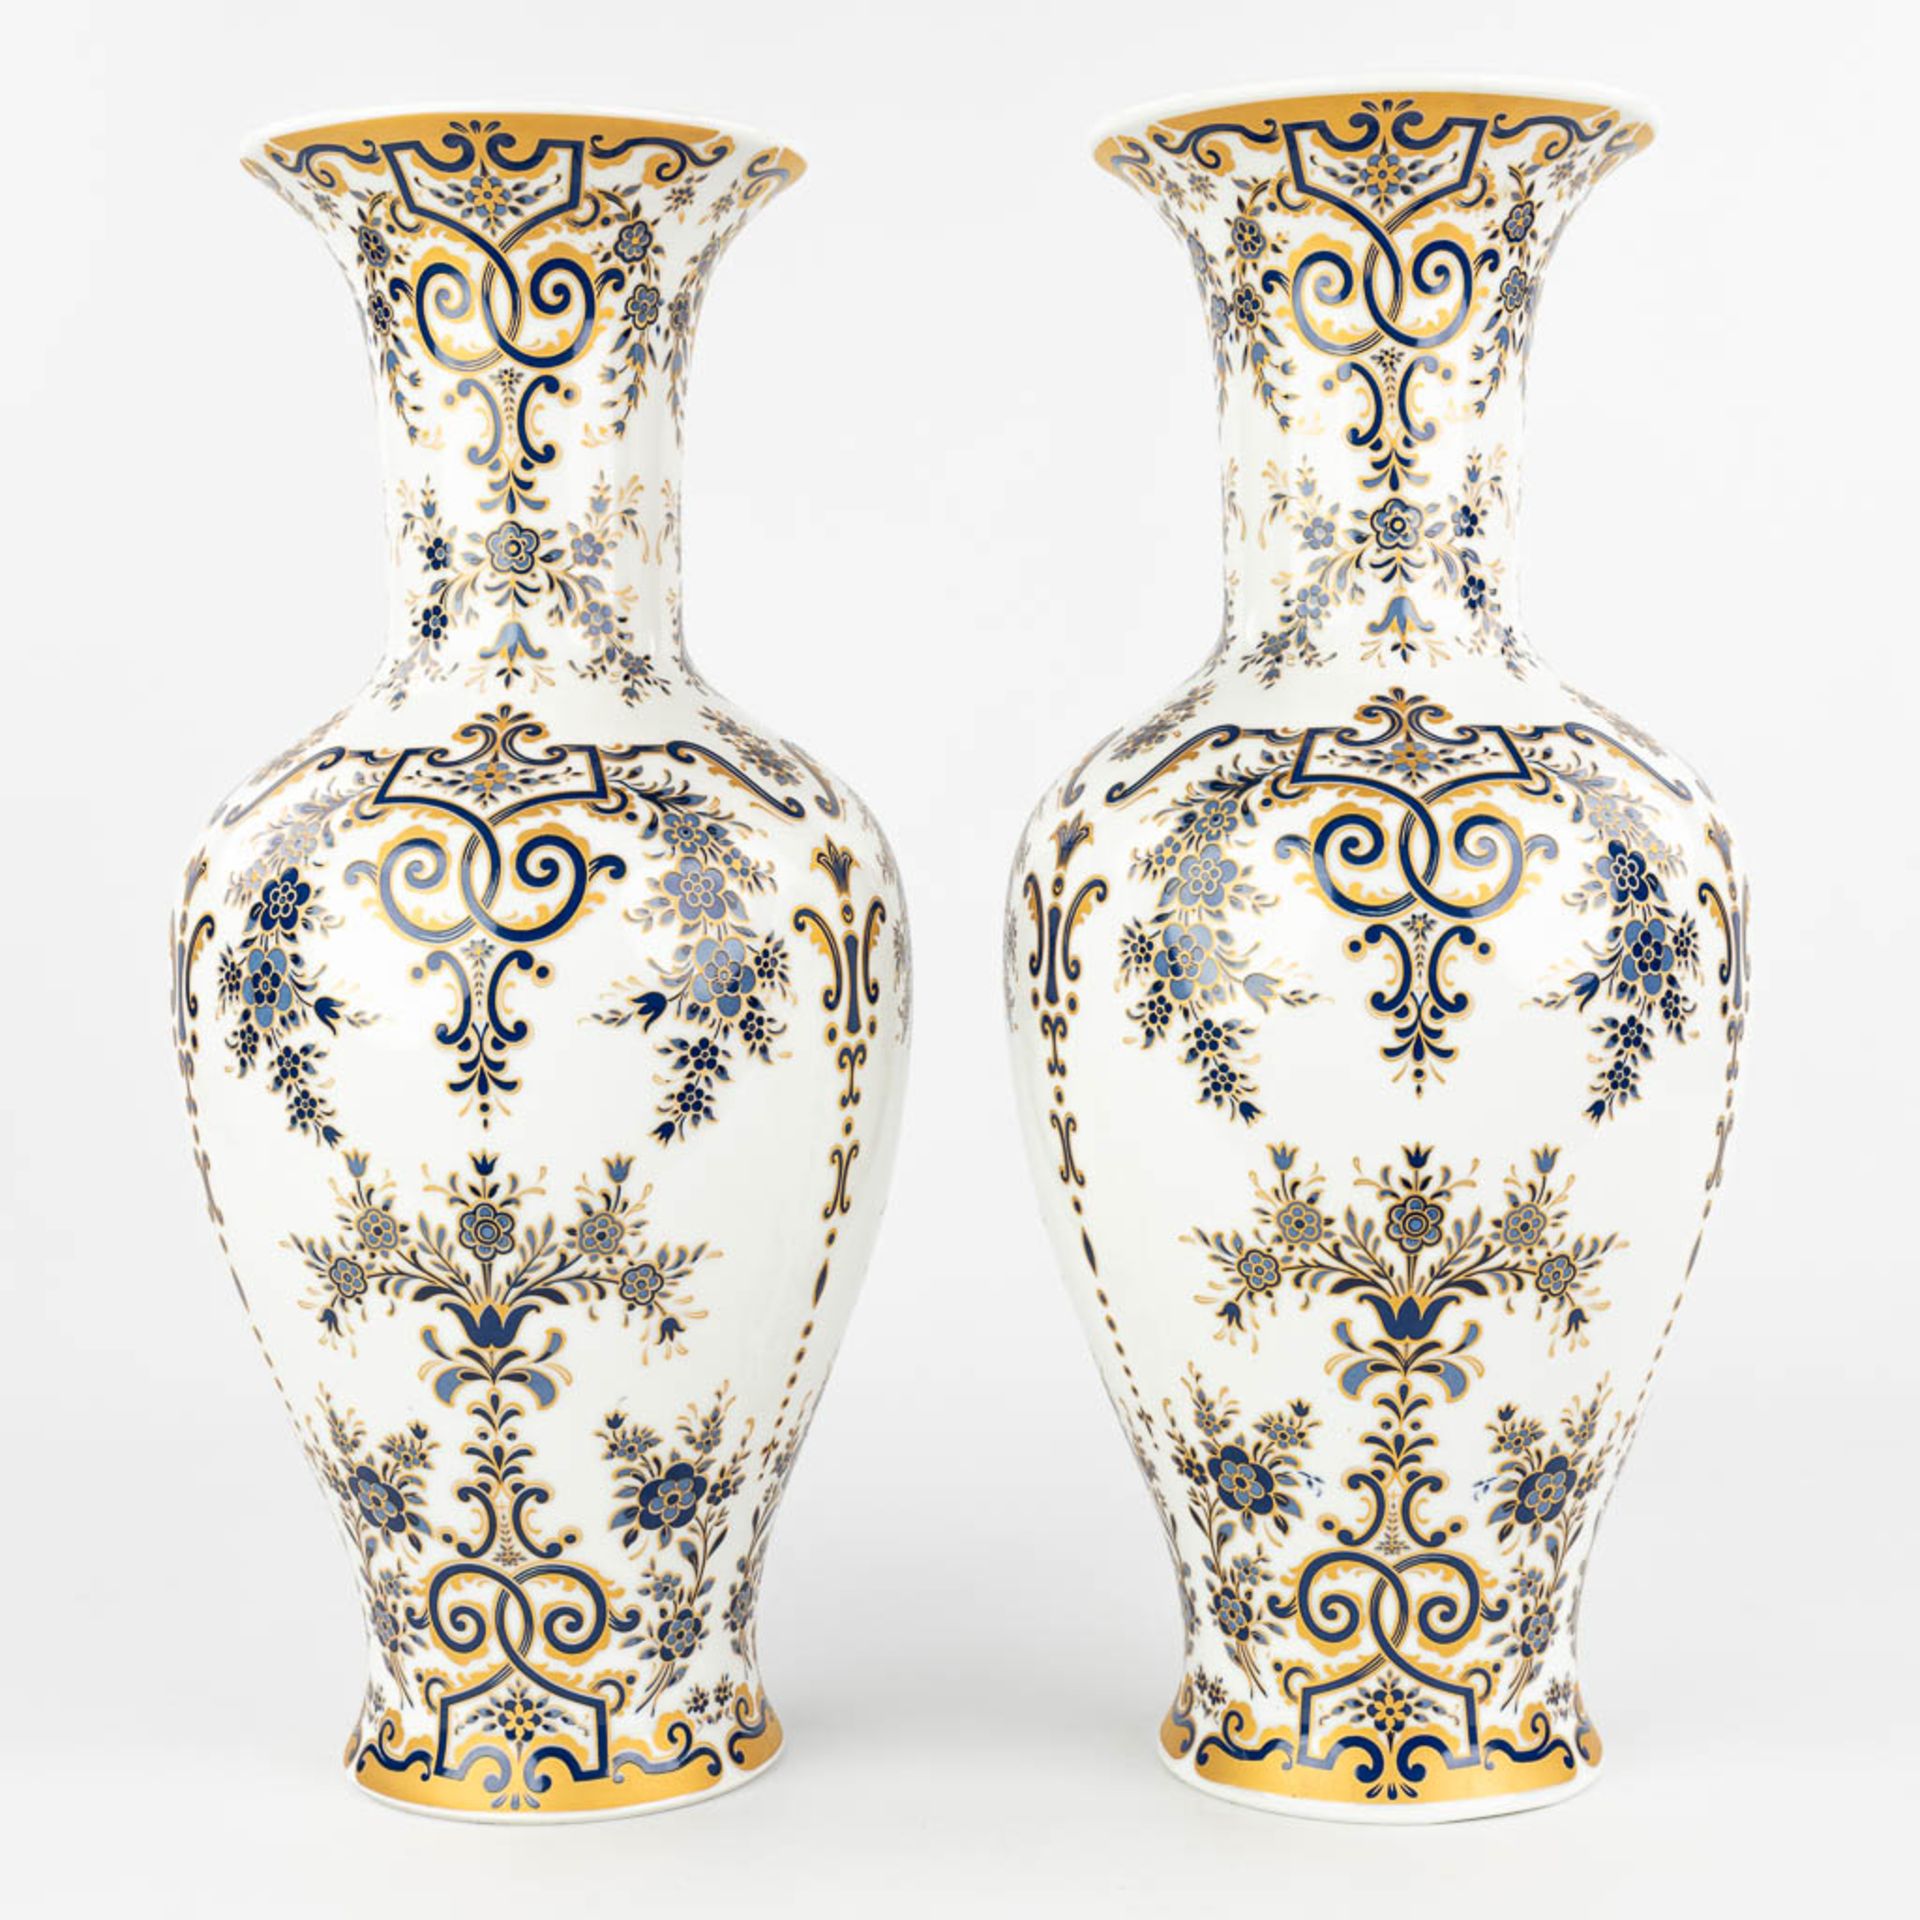 A pair of white porcelain vases with blue and gold decor marked Krautheim Bavaria and made in German - Image 9 of 13